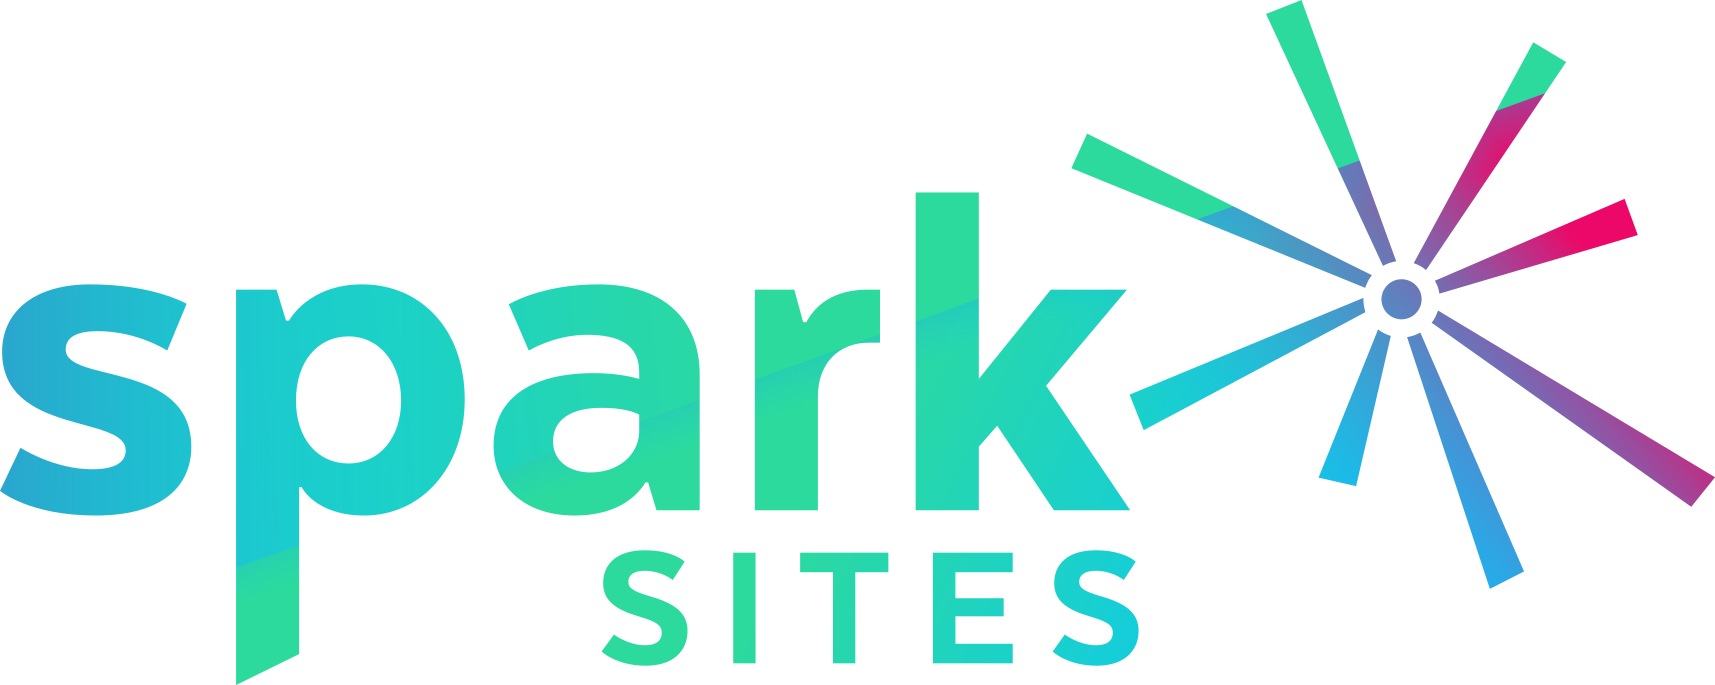 Spark Sites from State of the Spark